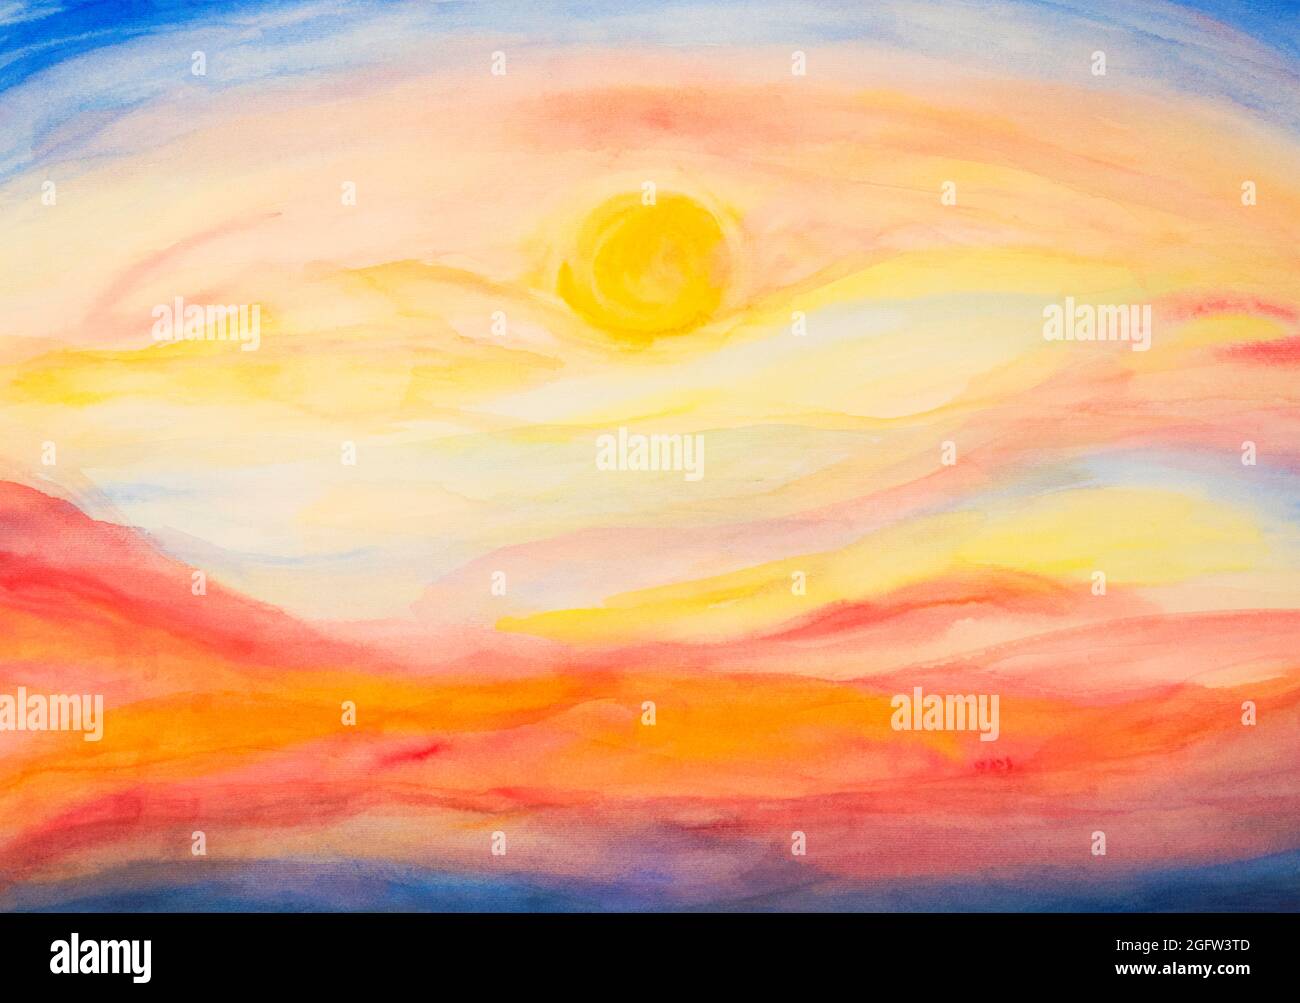 Bright colorful abstract sunset or sunrise sky wallpaper background hand  painted with watercolor. Horizontal banner with sky and sun in the center  Stock Photo - Alamy